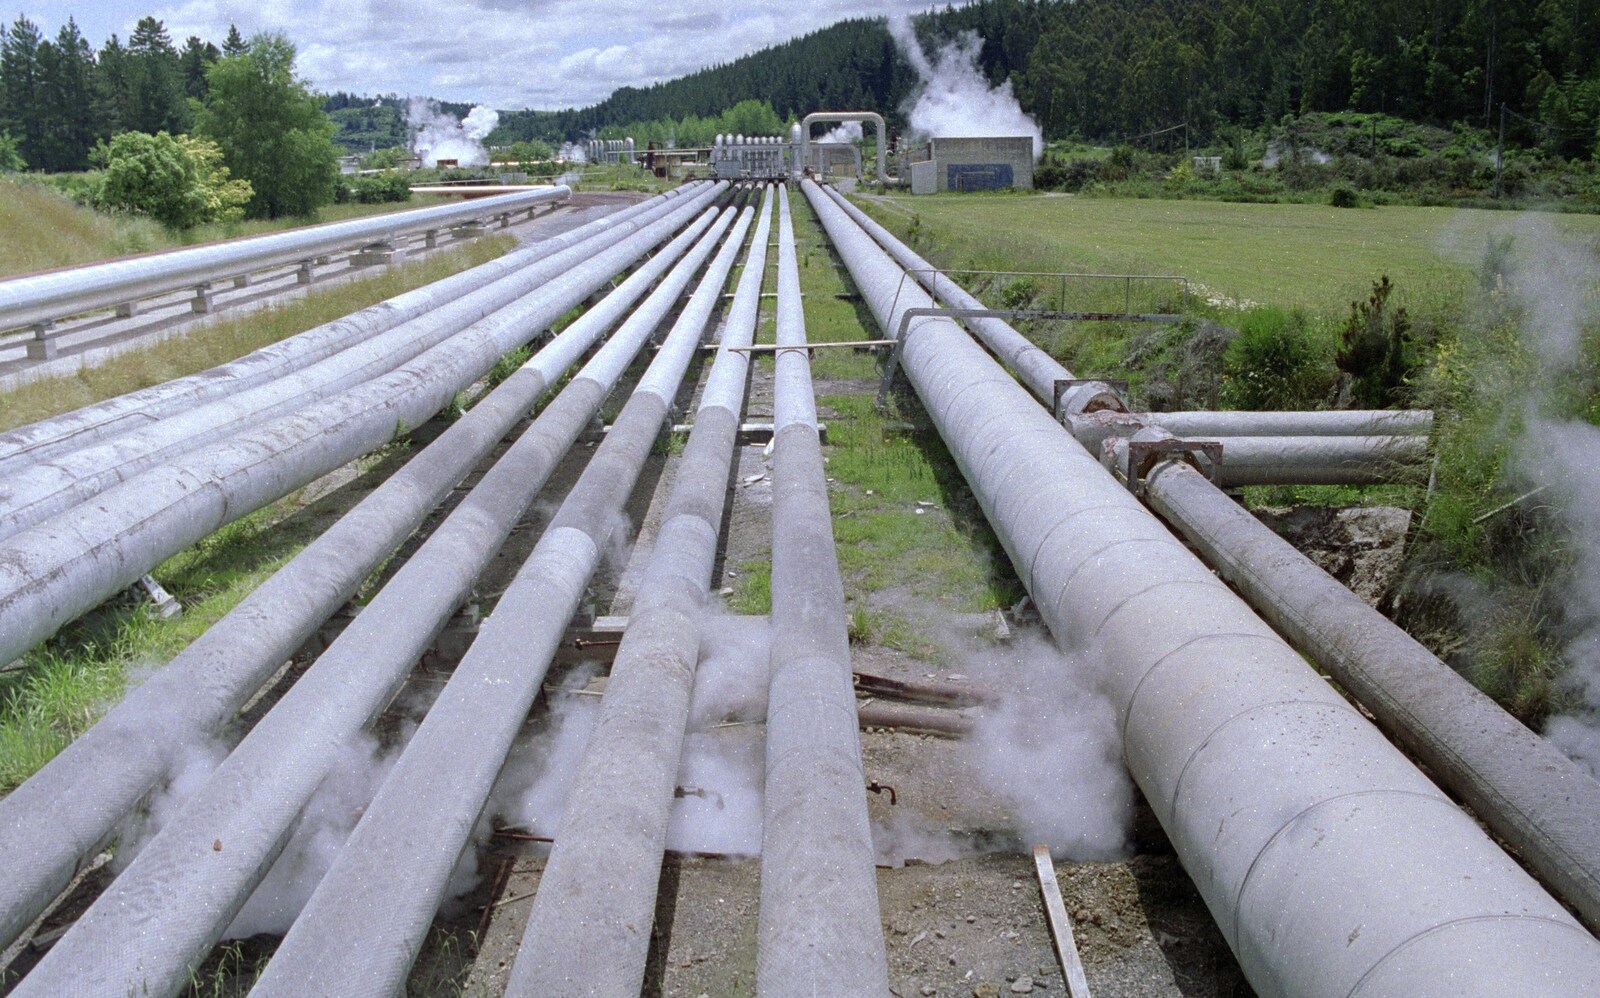 A Geothermal energy plant from A Road-trip Through Rotorua to Palmerston, North Island, New Zealand - 27th November 1992